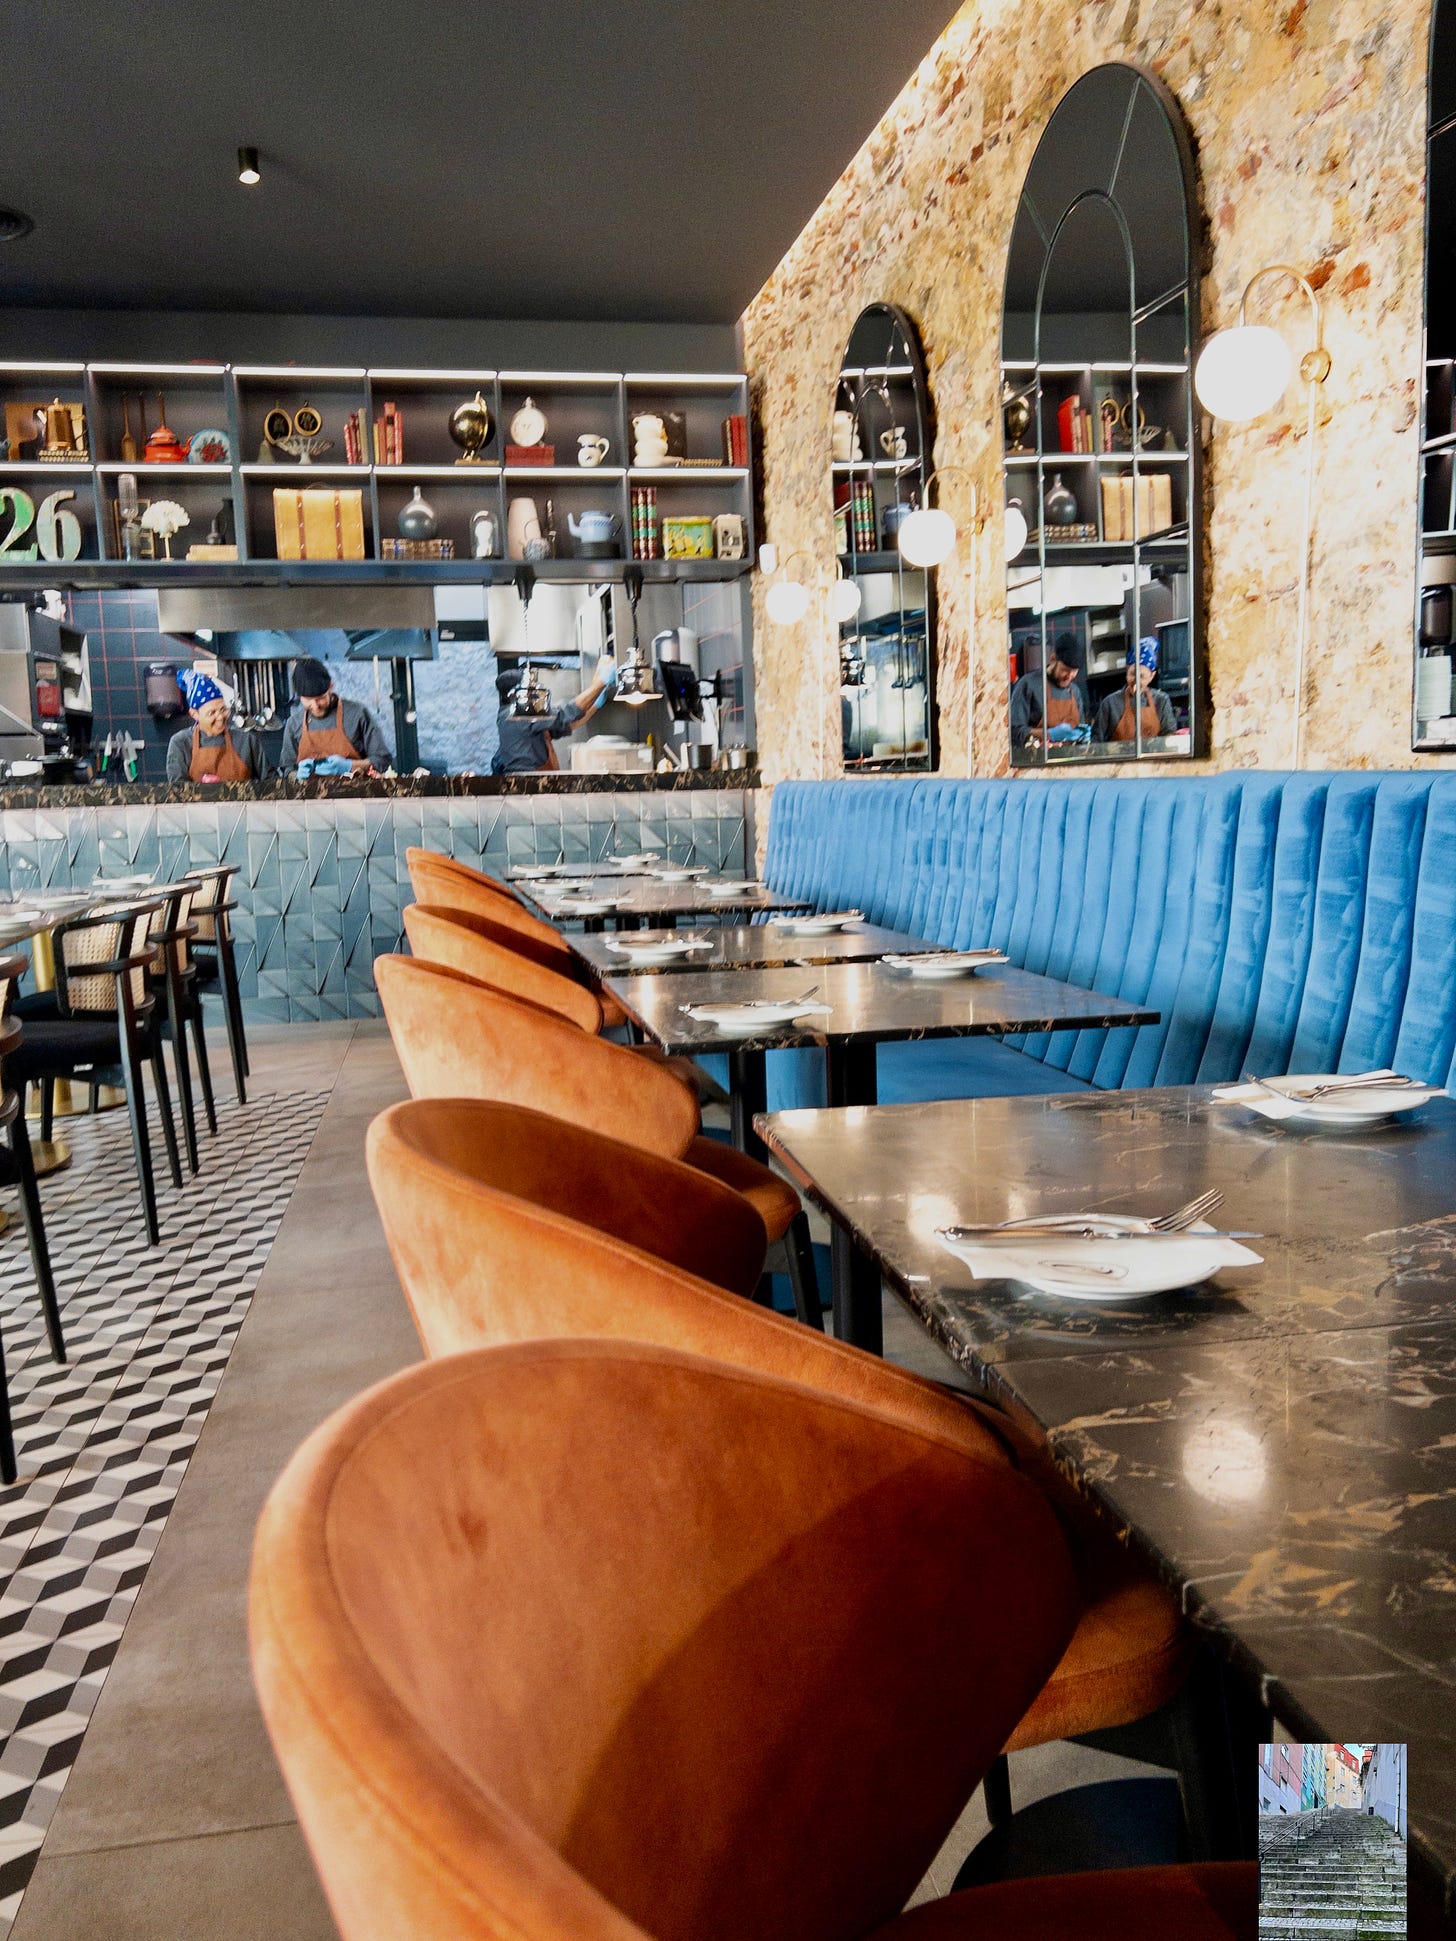 An elegant vegan food restaurant in LIsbon with warm burnt orange and blue colors in its decor